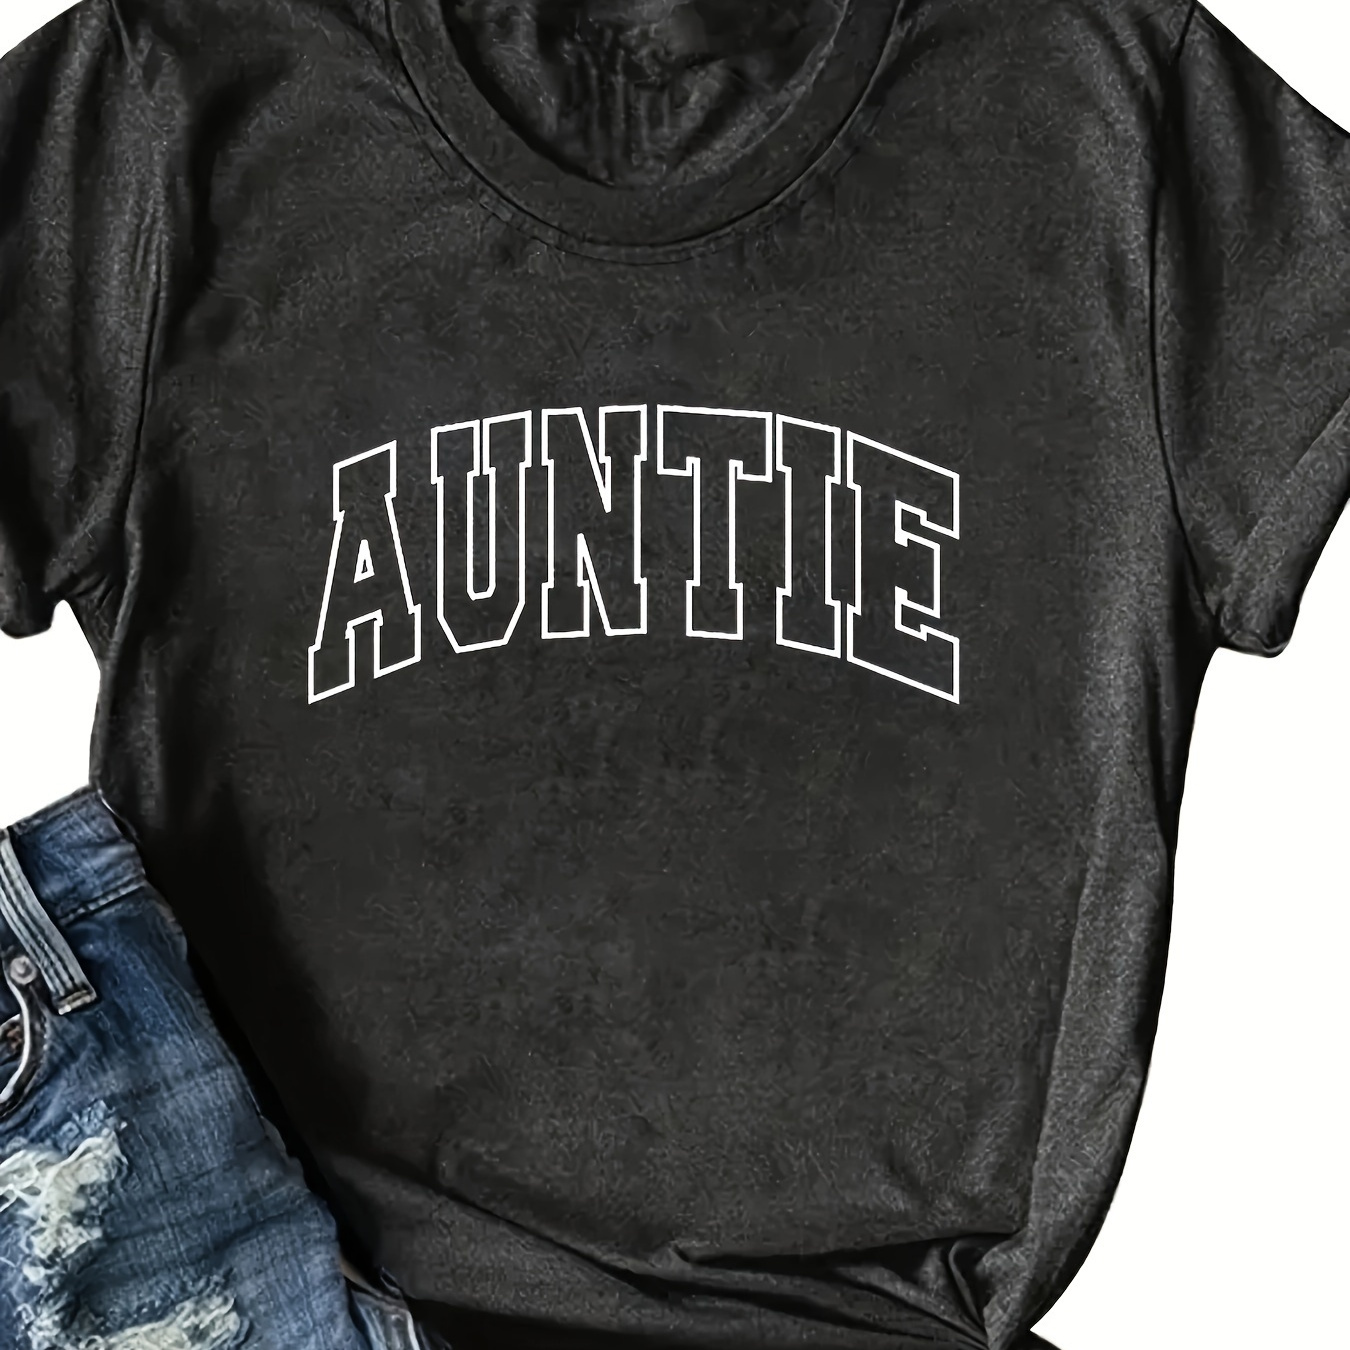 

Auntie Print Crew Neck T-shirt, Casual Short Sleeve Summer Top, Women's Clothing